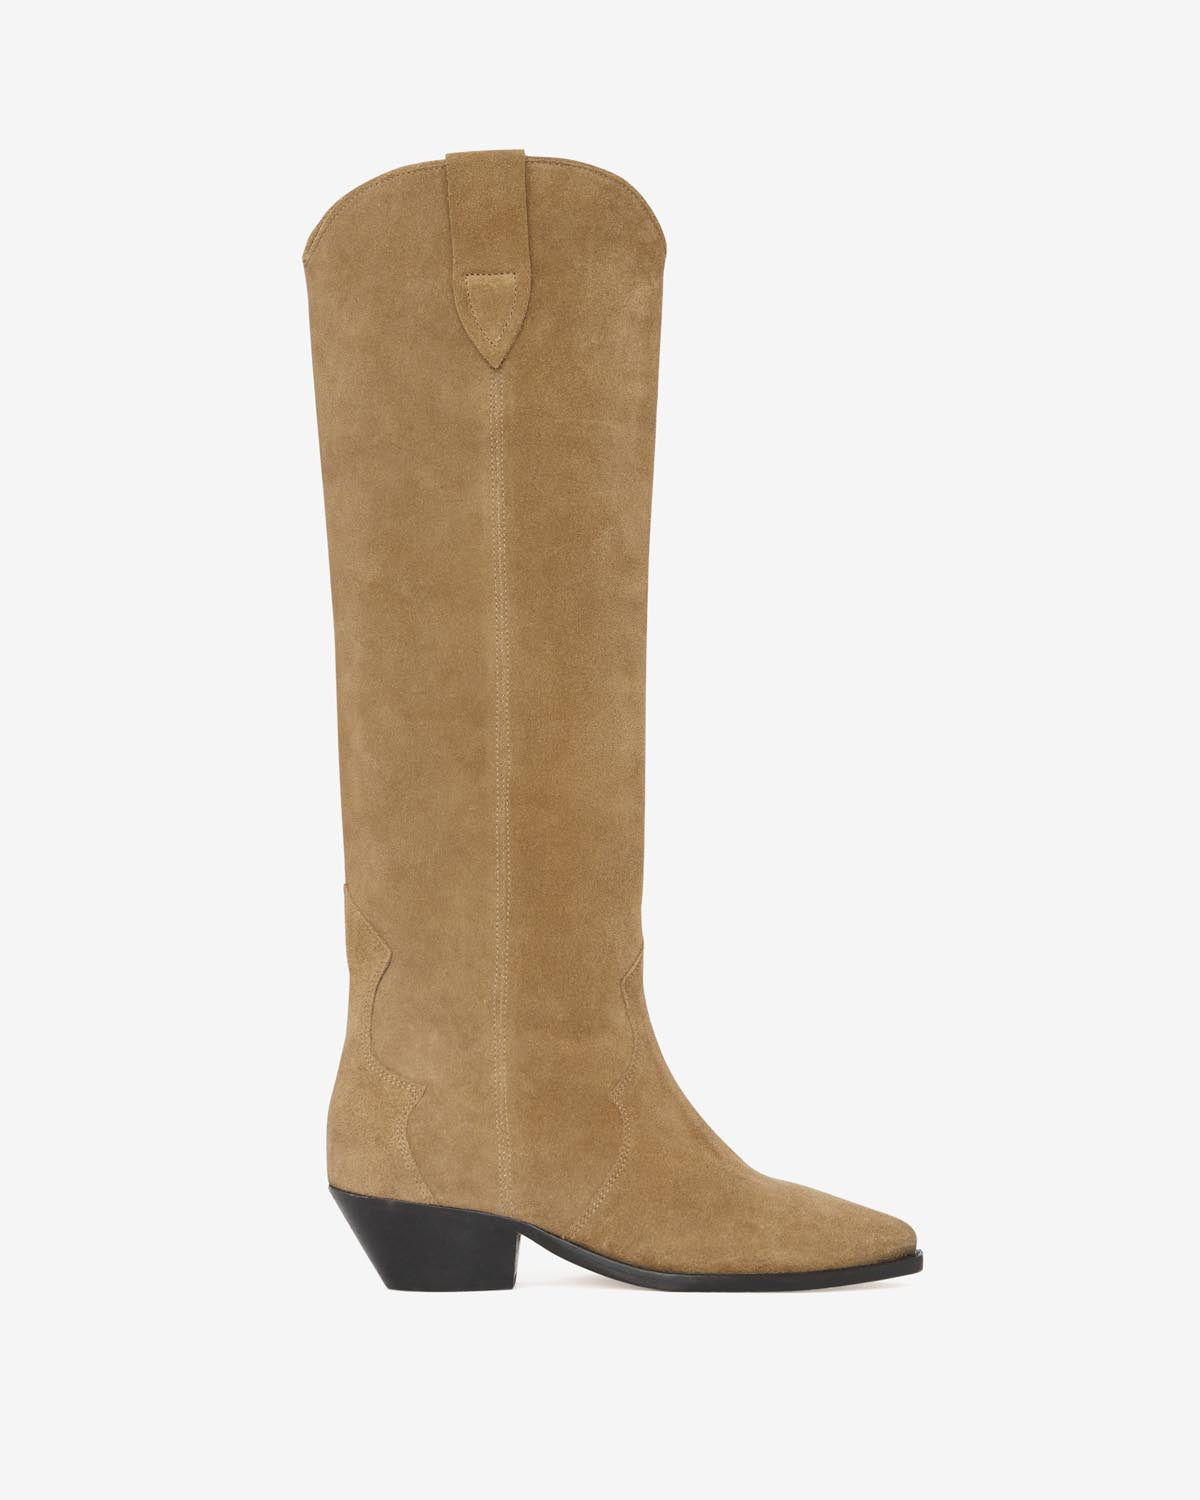 Denvee boots Woman Taupe 5